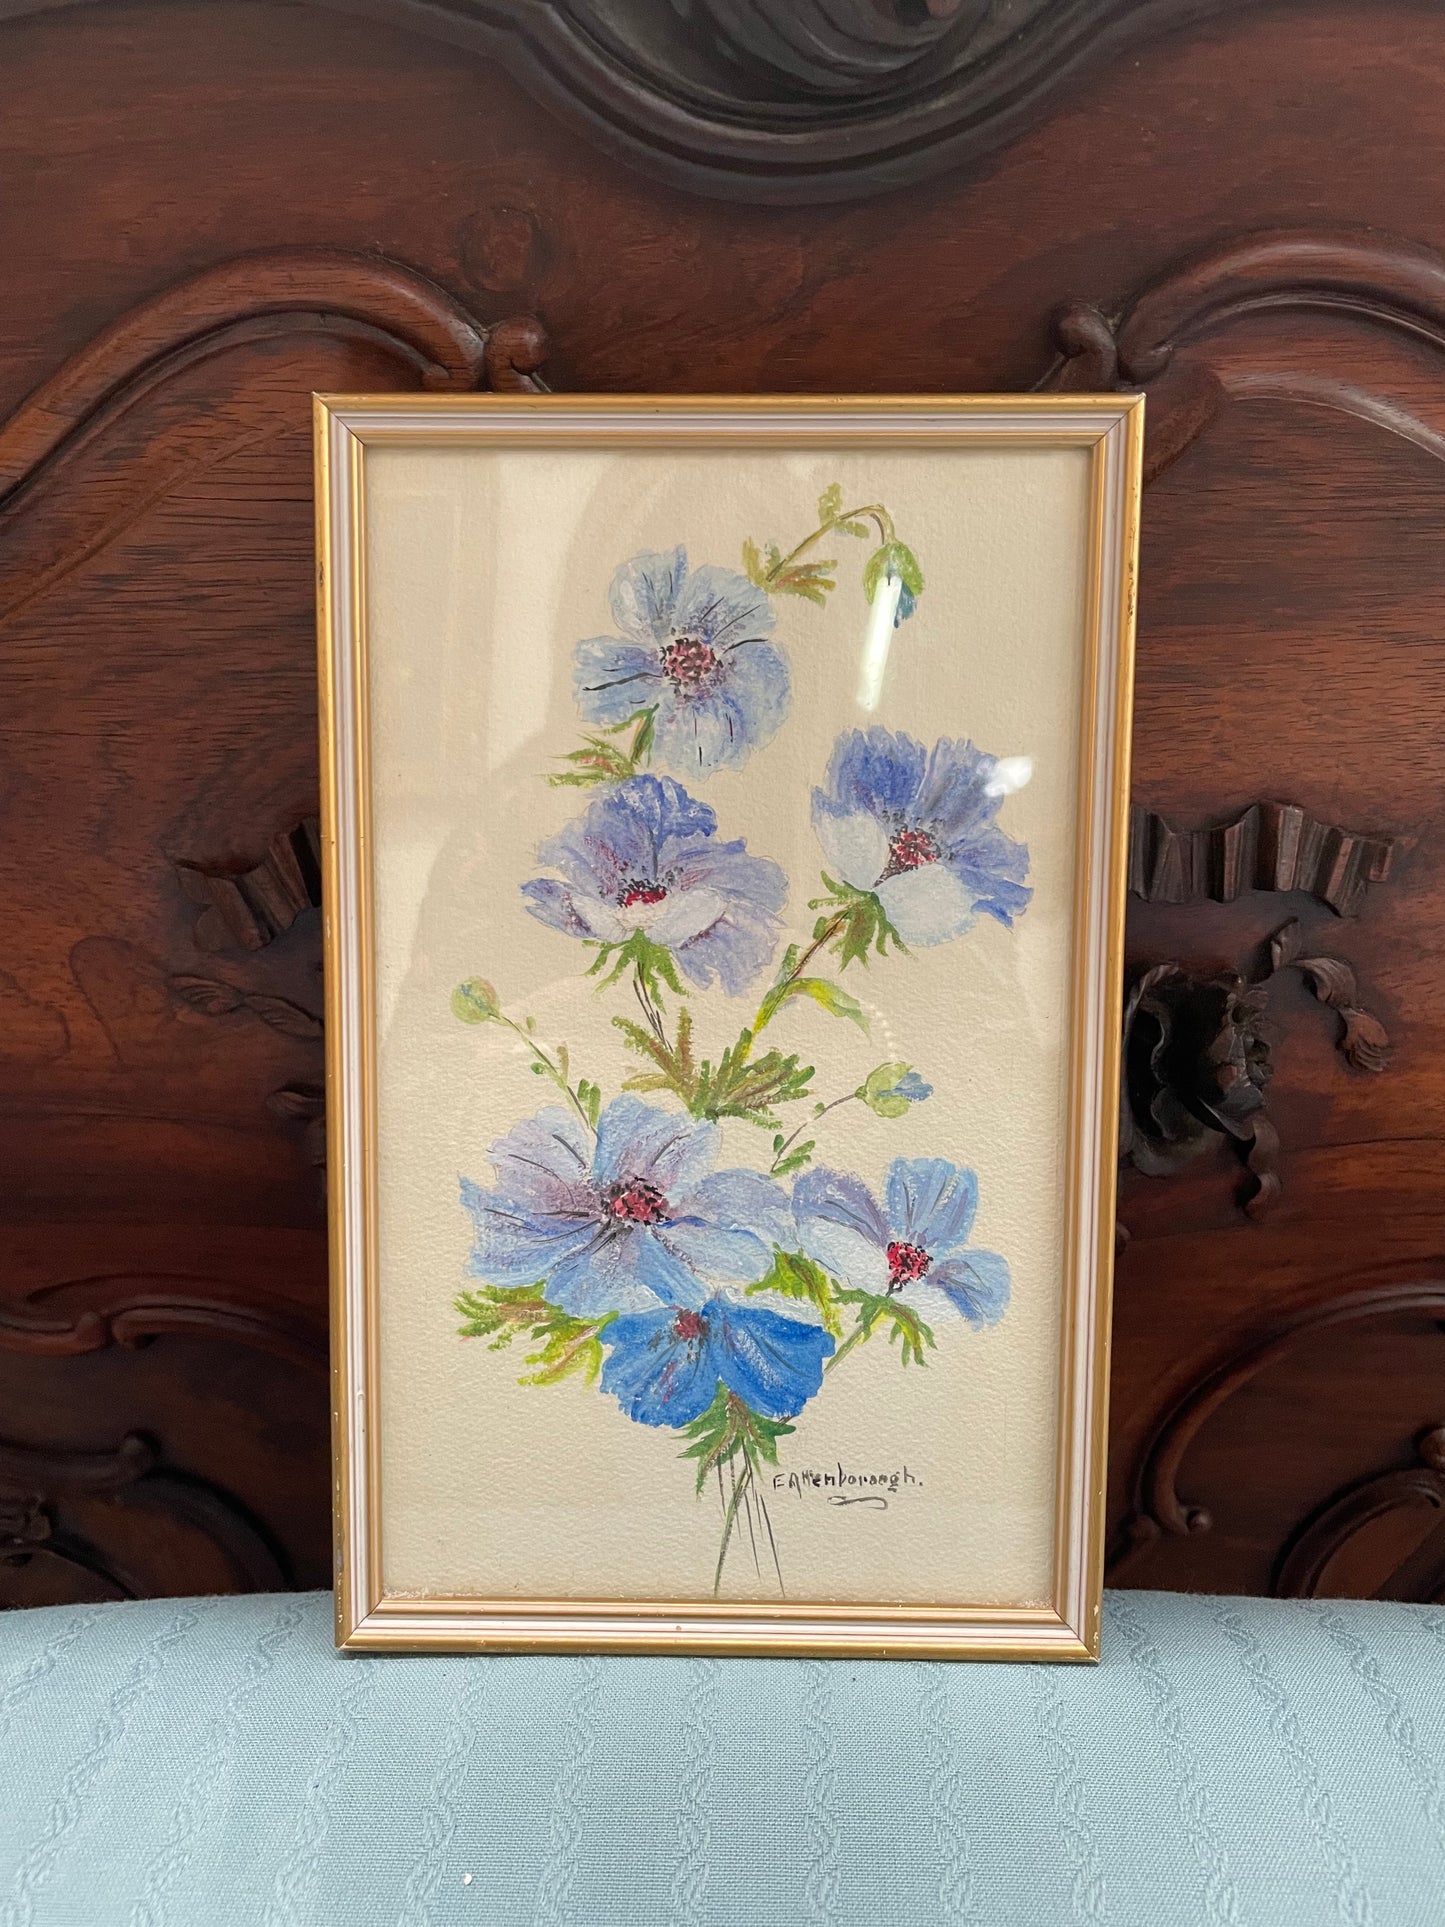 Charming Framed & Signed Floral Watercolor